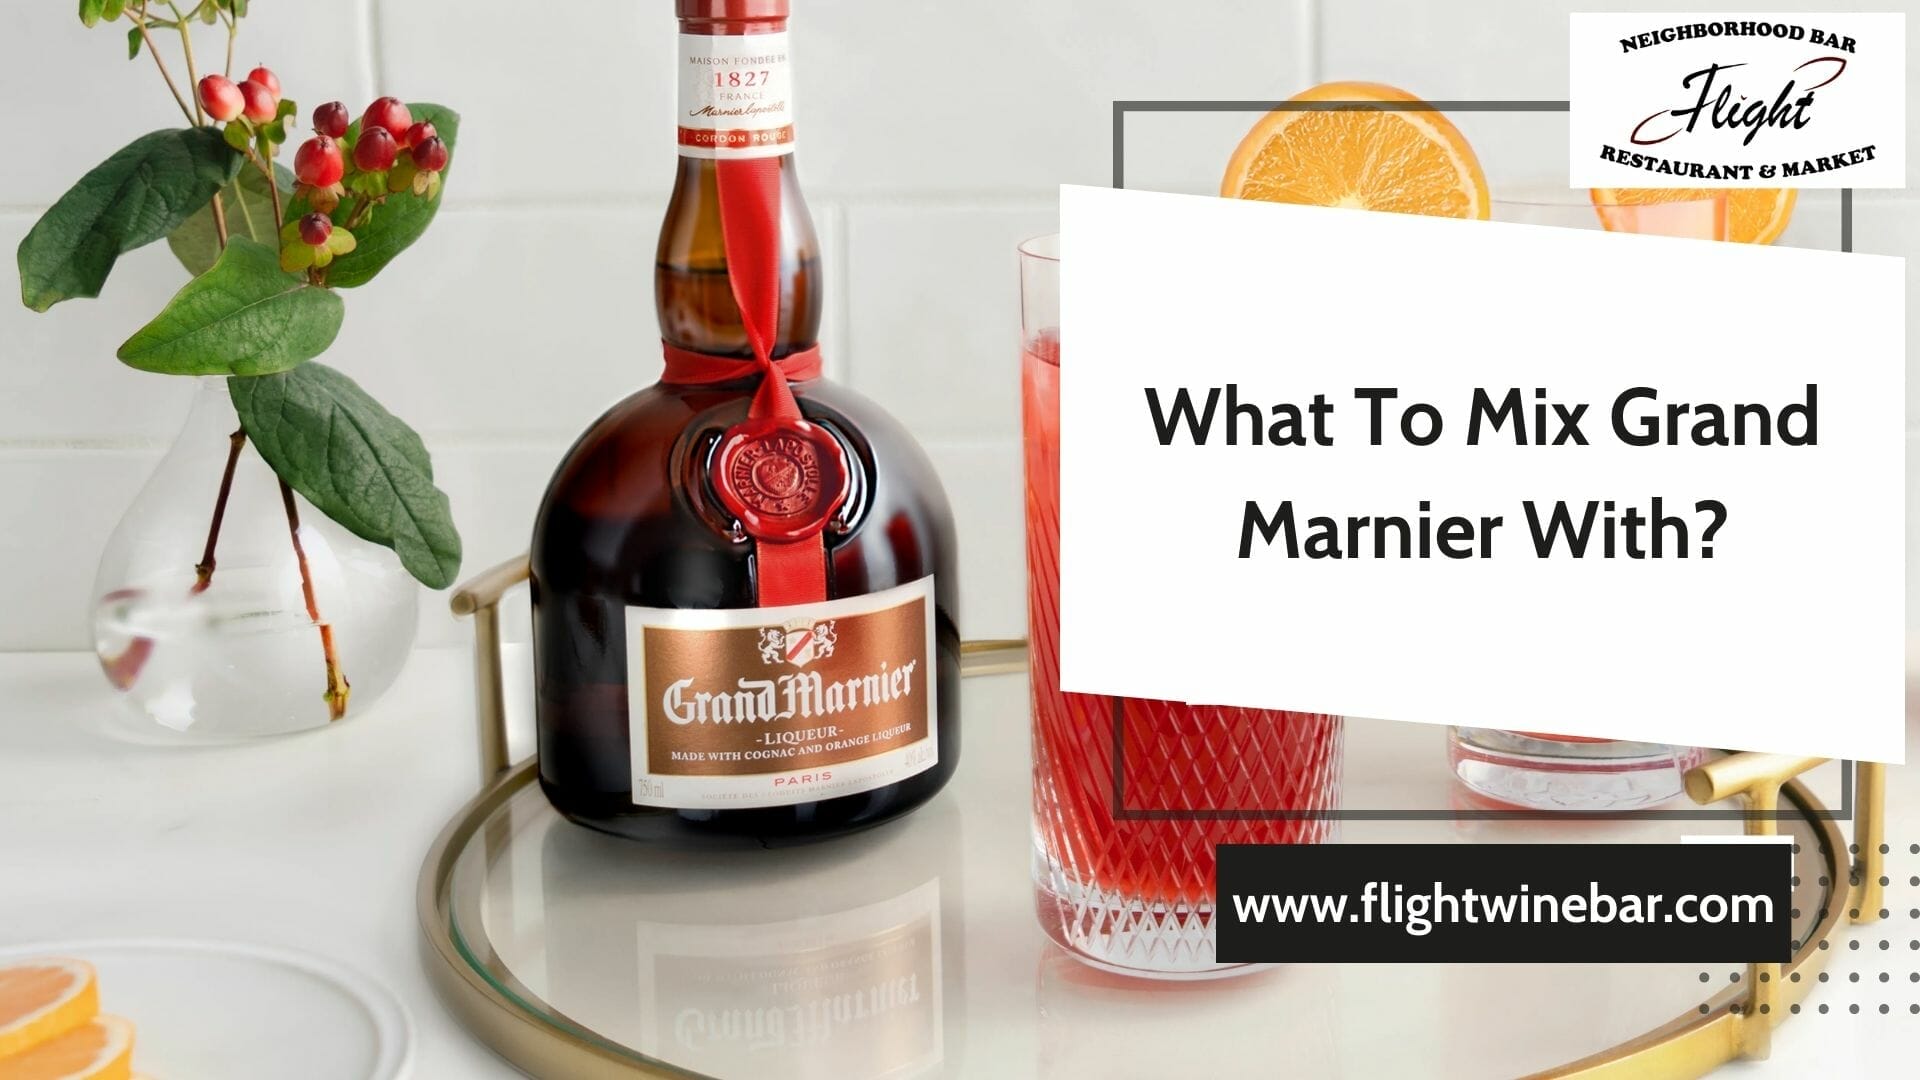 What To Mix Grand Marnier With